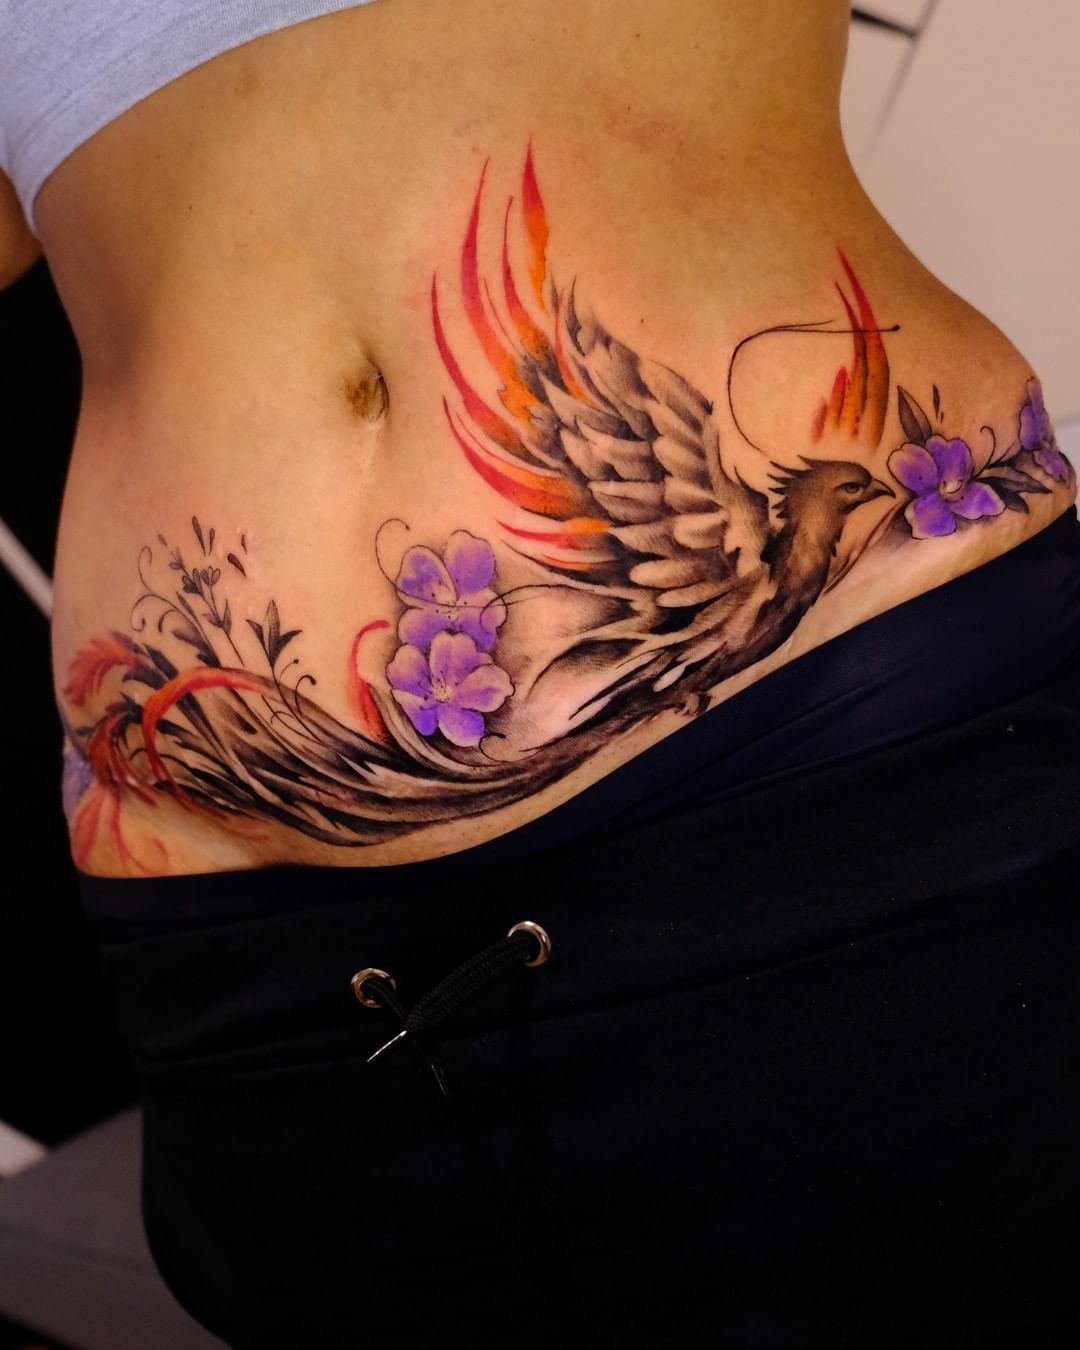 Here are some ideas for female belly tattoos